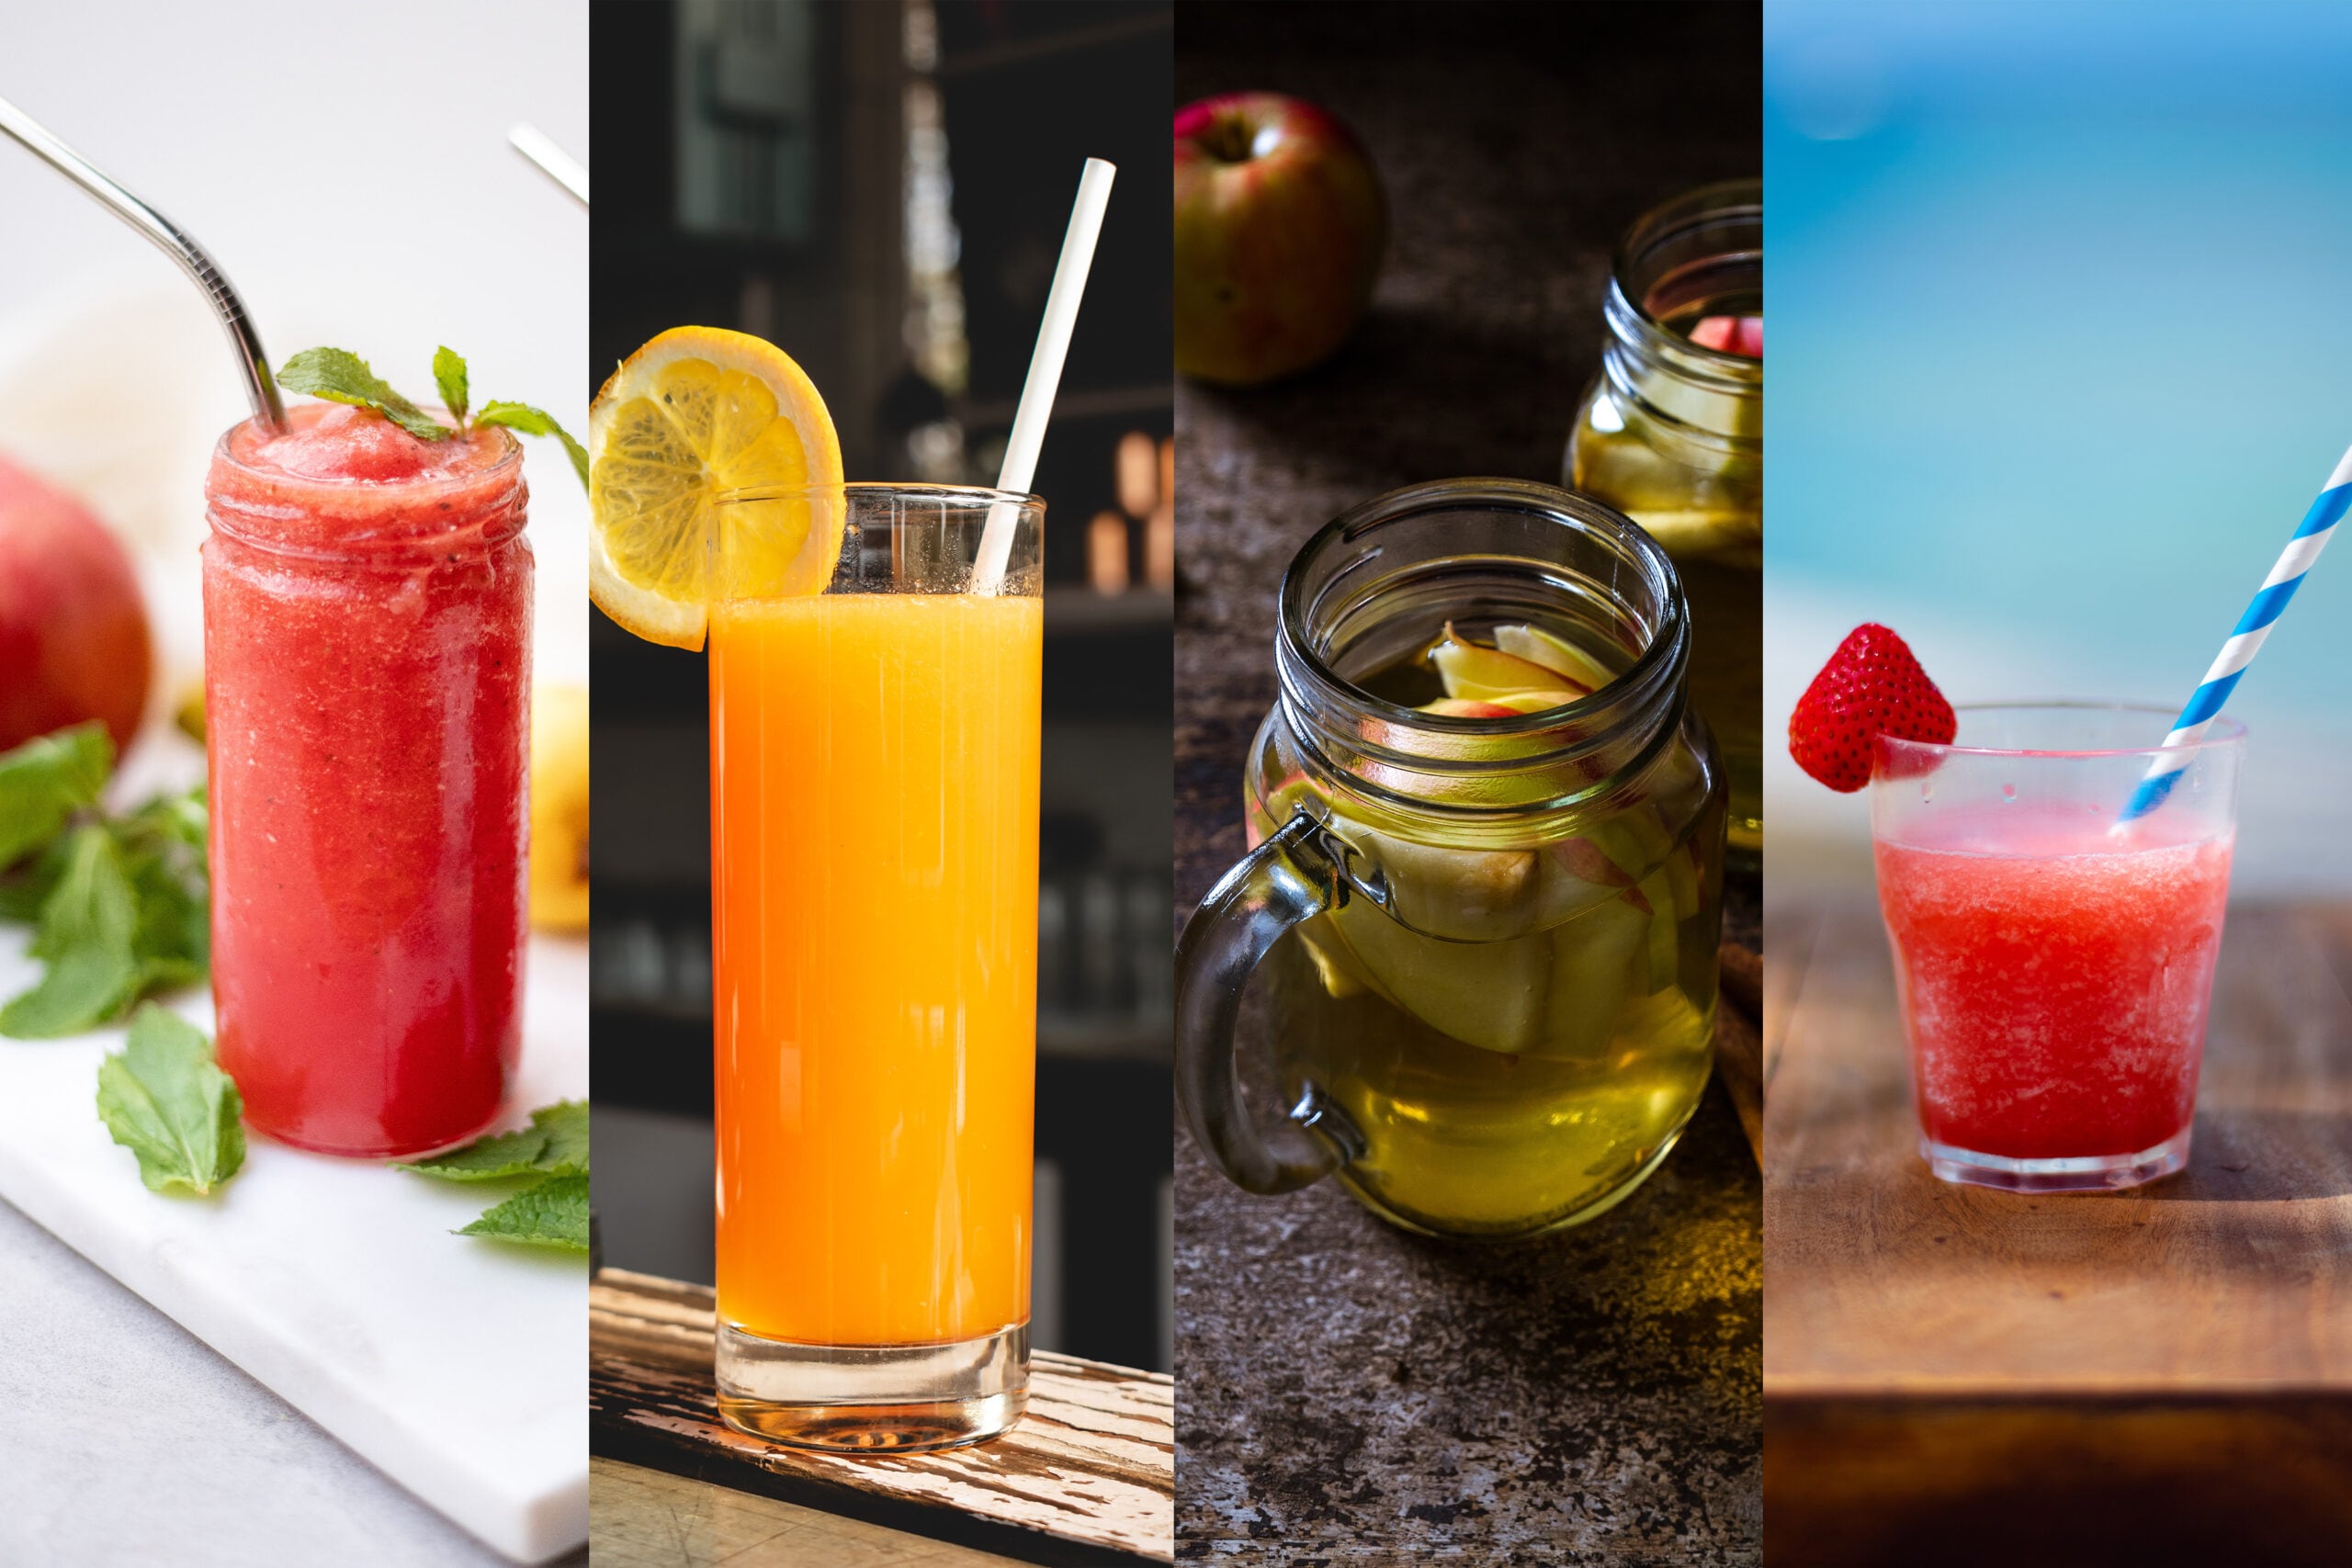 Fruit juices are delicious. Which one would you choose?